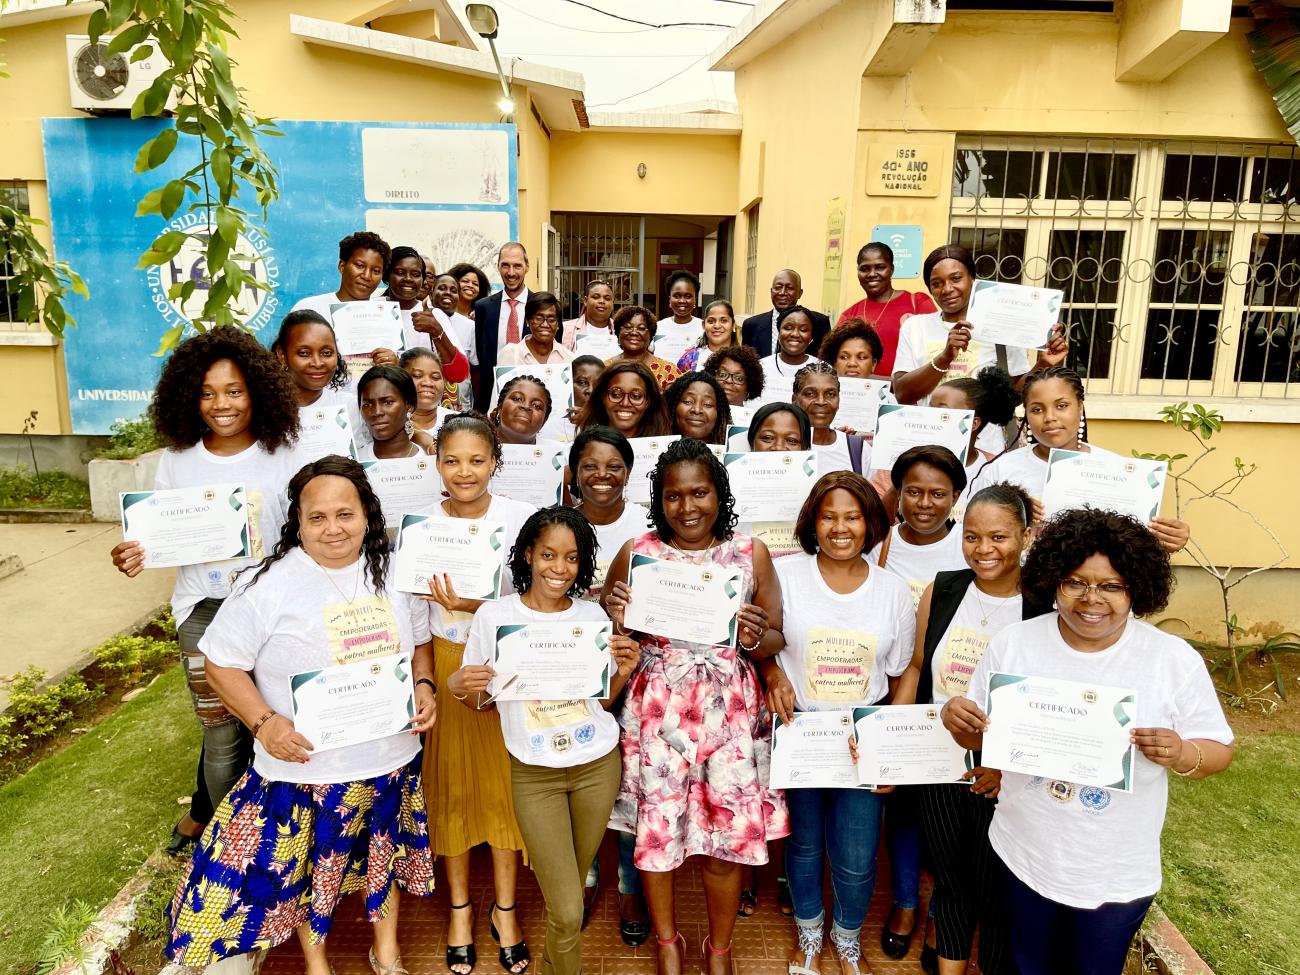 A large group of women hold up certificates